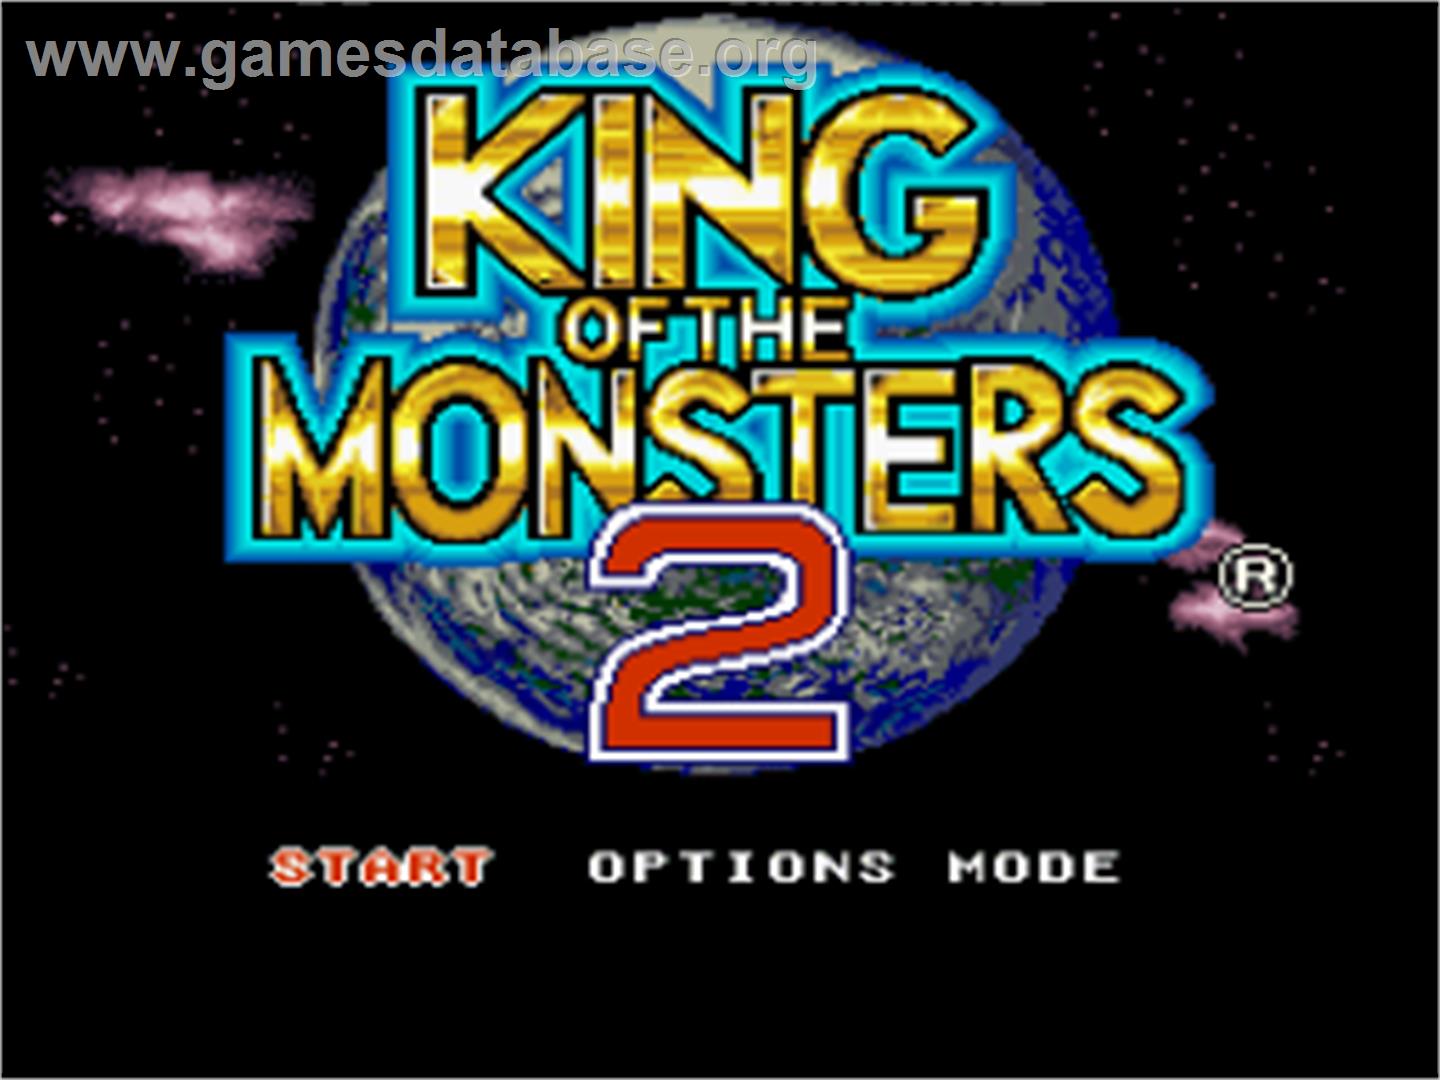 King of the Monsters 2: The Next Thing - Nintendo SNES - Artwork - Title Screen